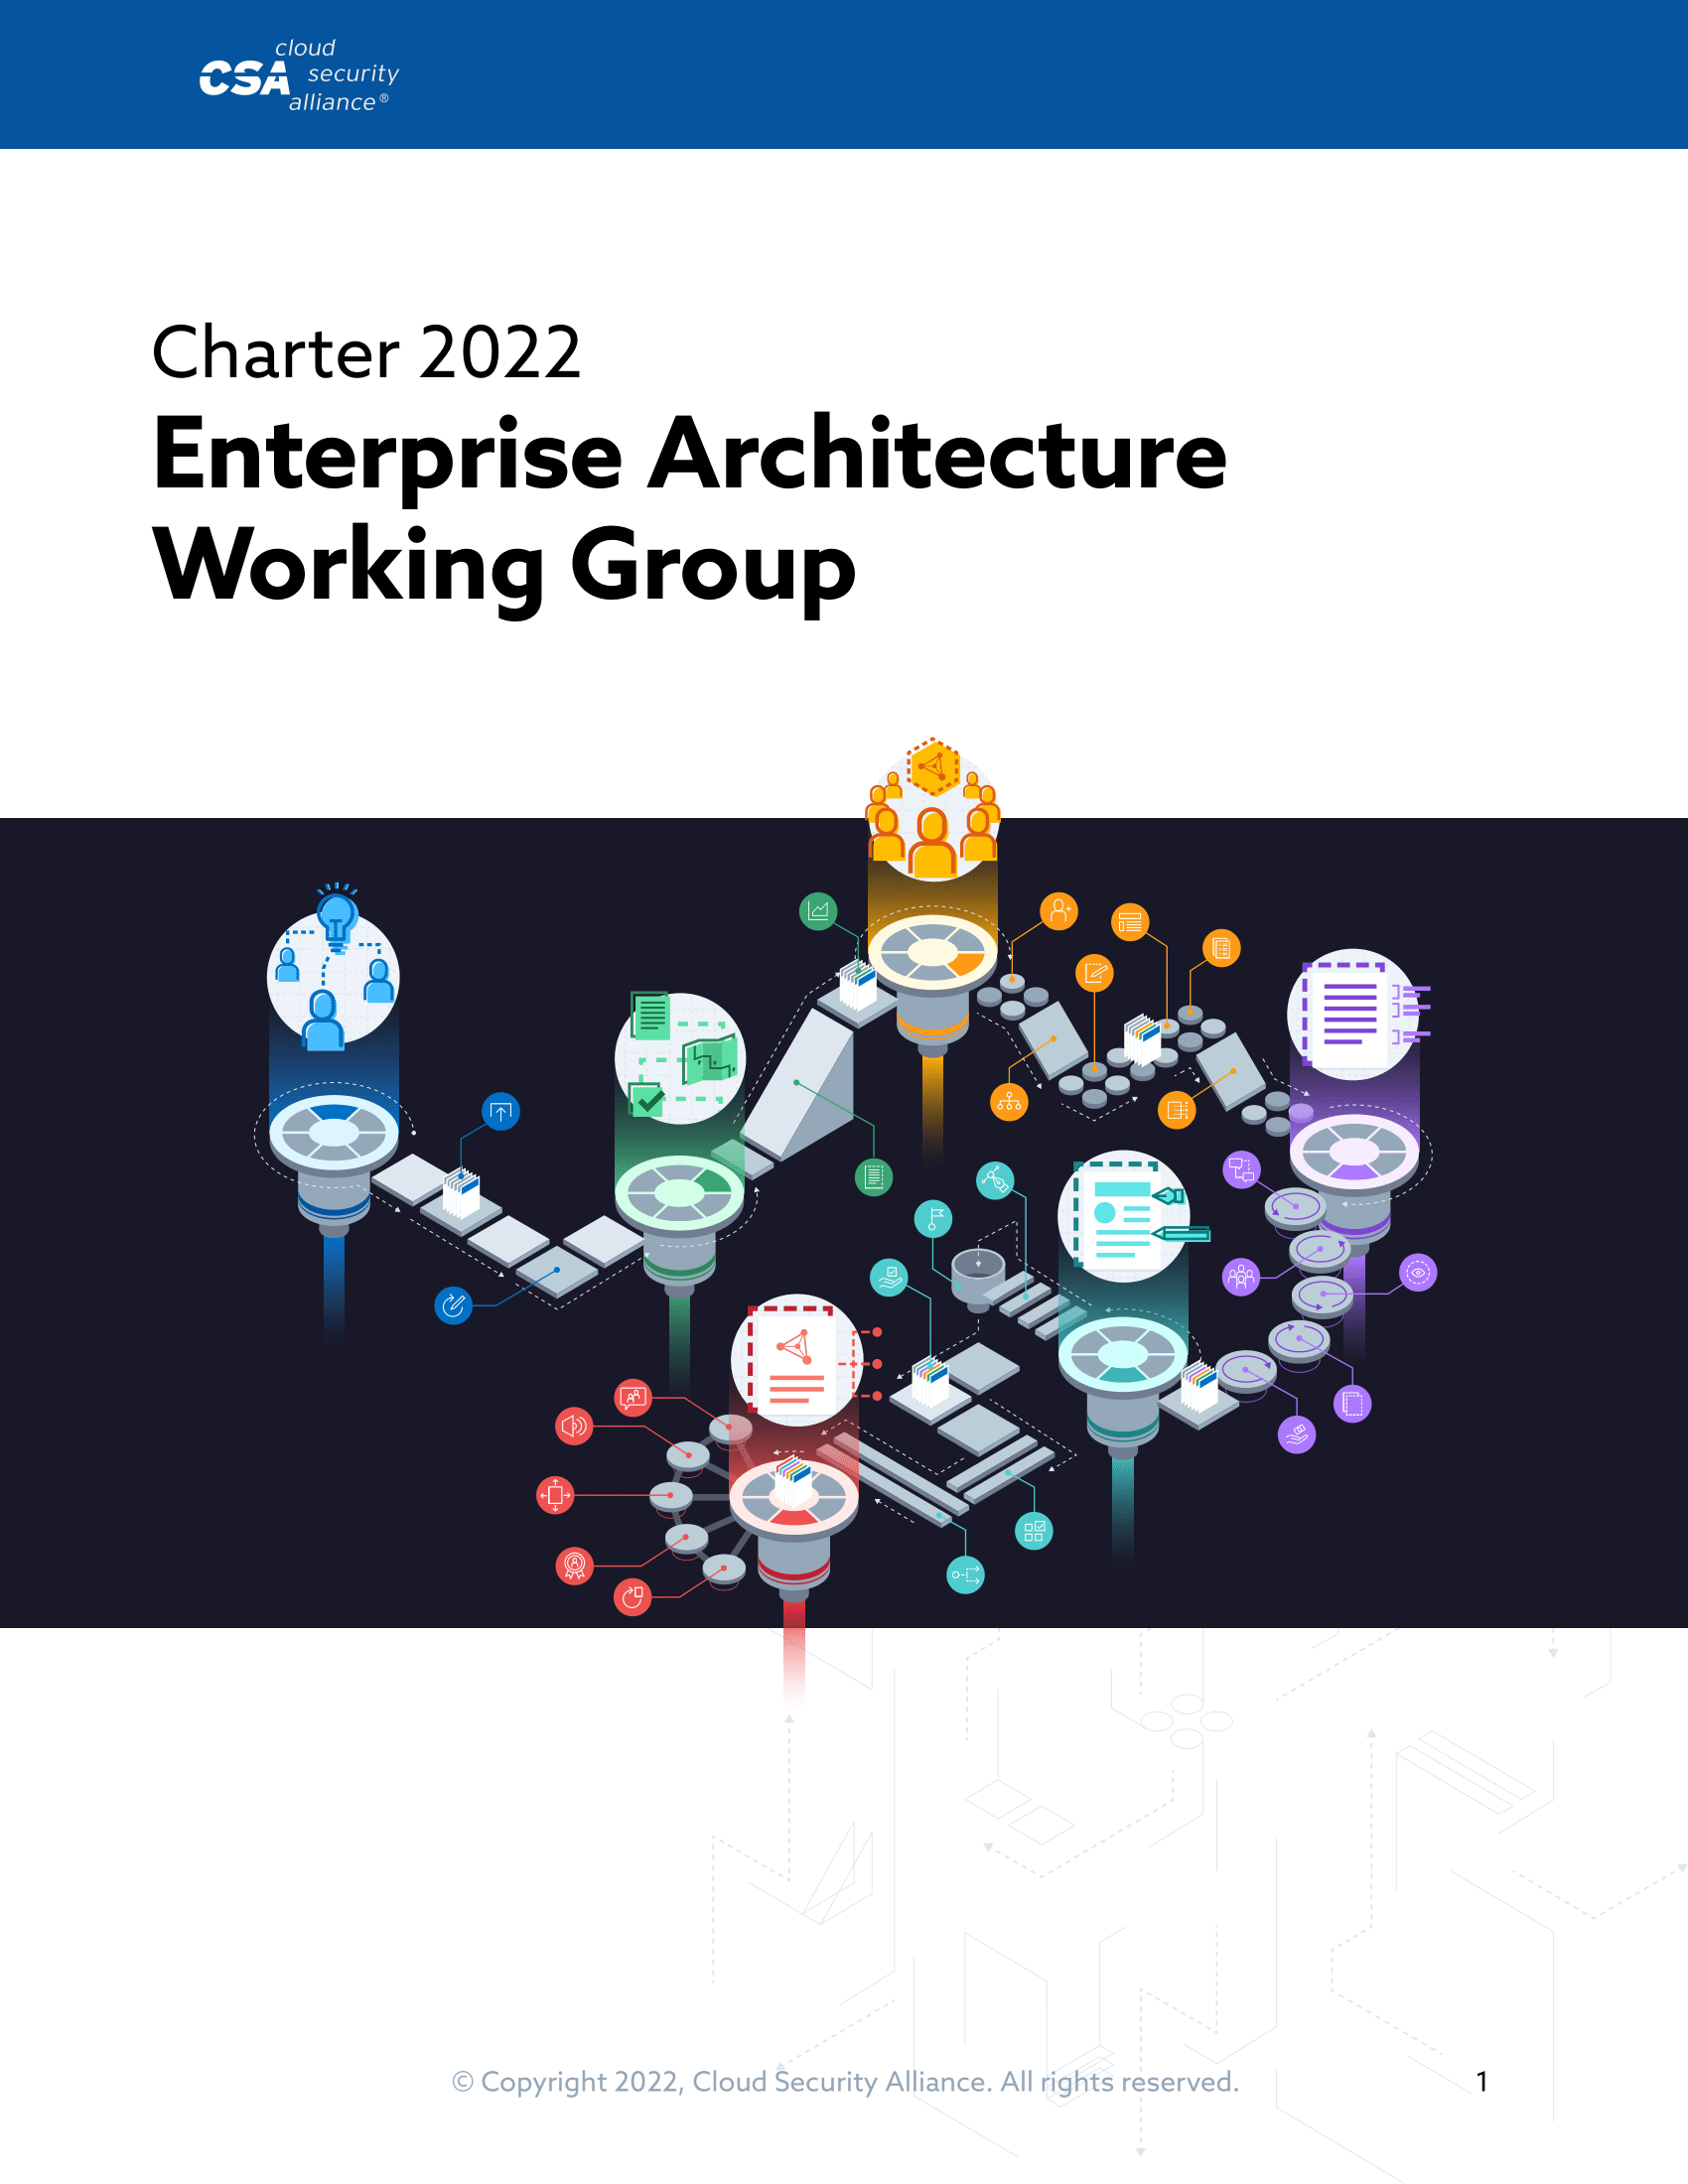 Enterprise Architecture Working Group Charter 2022